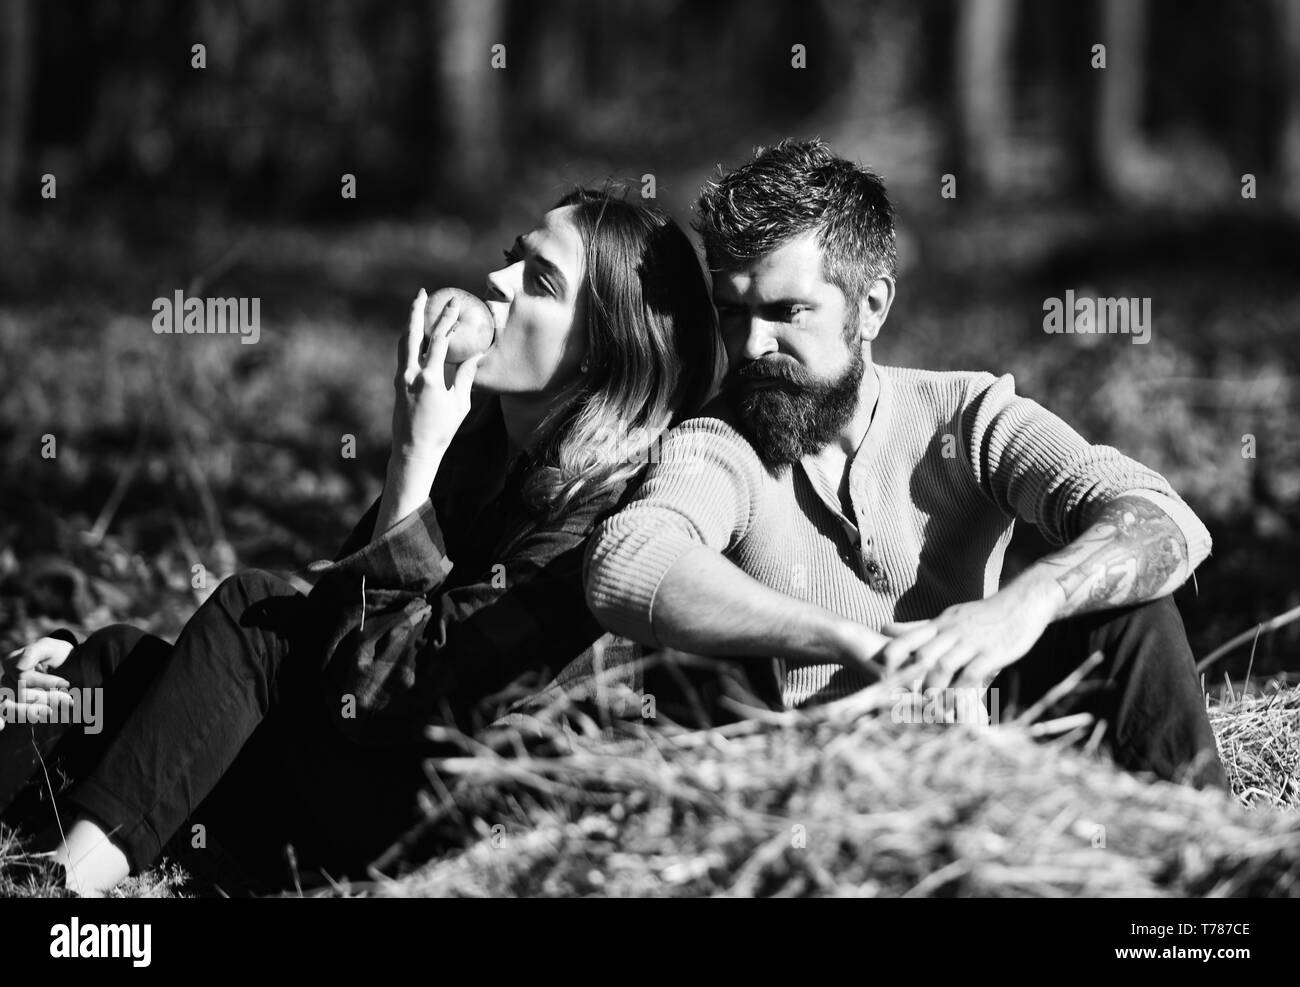 Relationship and fall time concept. Girl and bearded guy or lovers on a date sit on dry grass eating apple. Man and woman with serious faces on nature background. Couple in love spends time in park. Stock Photo